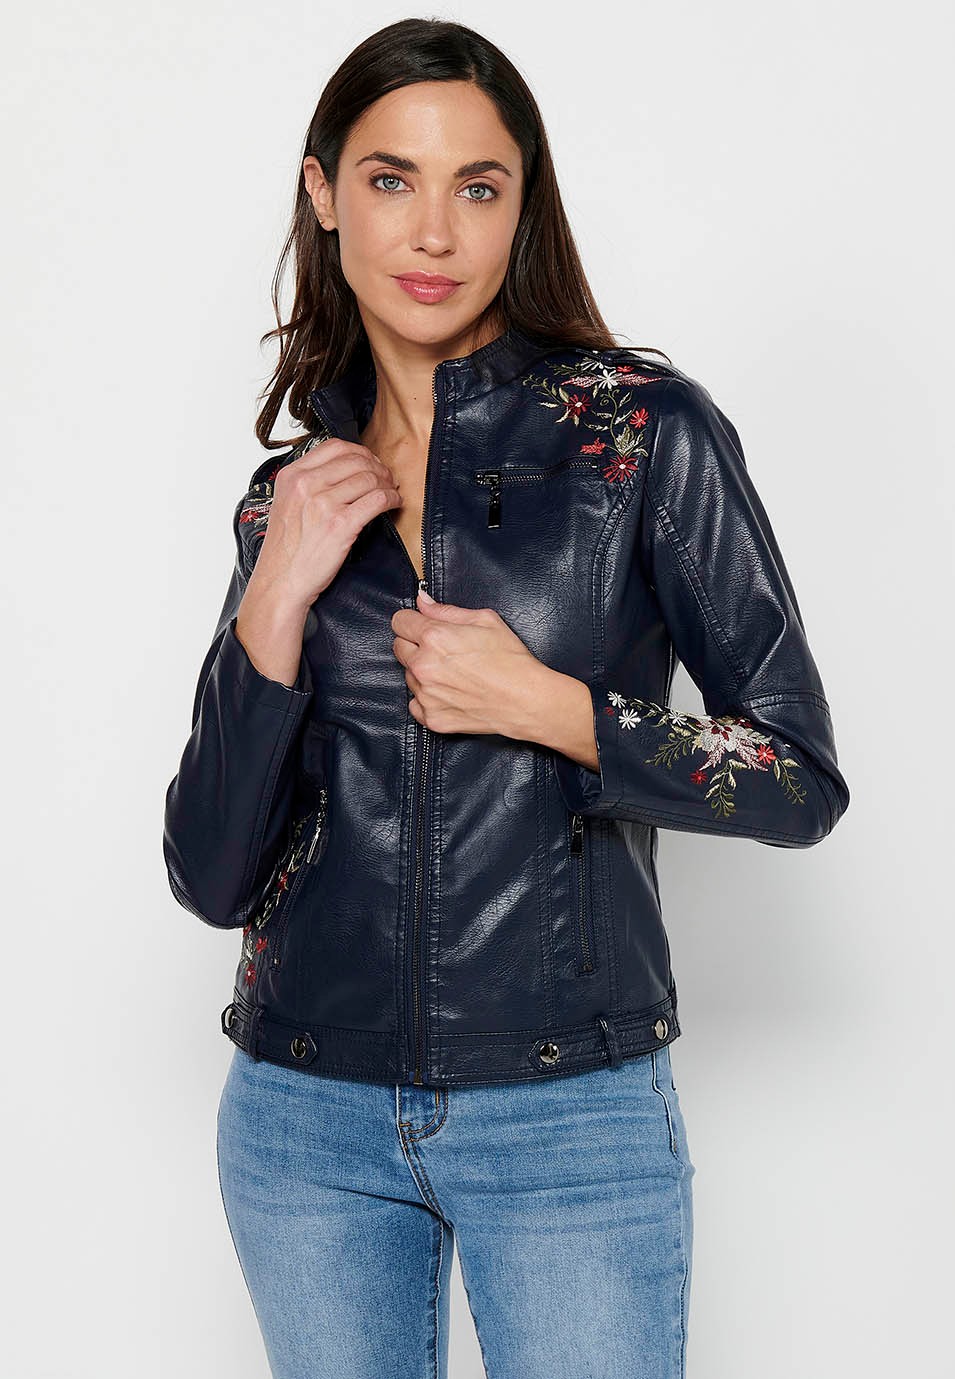 Leather-effect jacket with front zipper closure with floral embroidered details with round neck and front pockets in Navy for Women 9